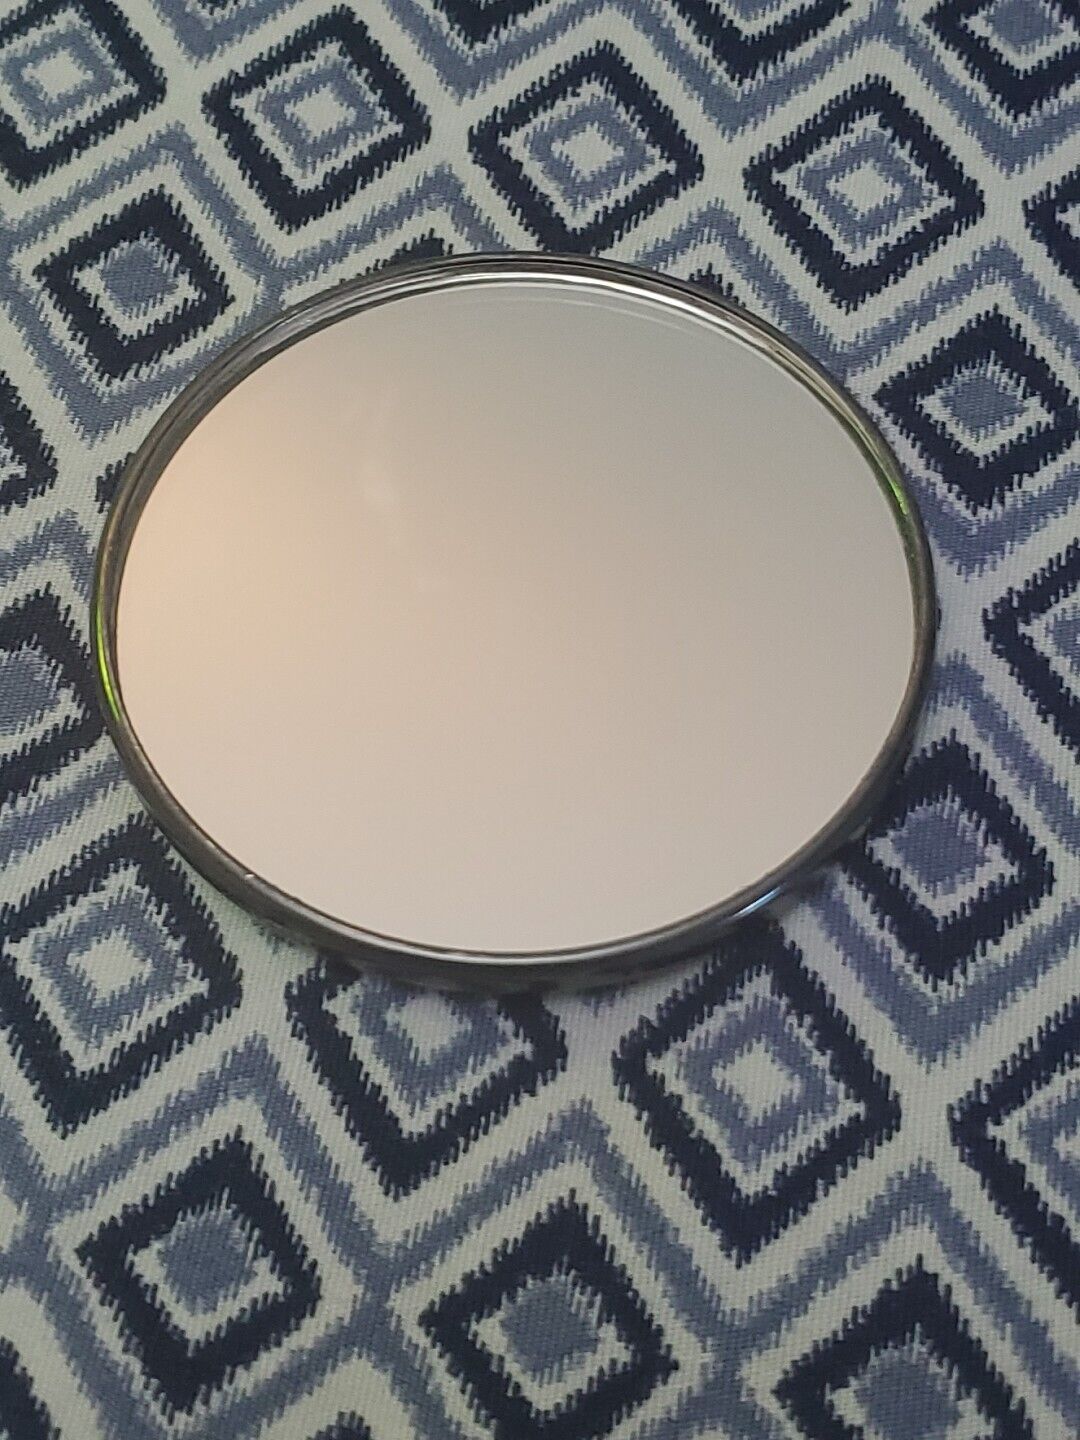 Tiffany & Co. Hand Mirror Polished Silver Plated Compact with Leaf Design 3\